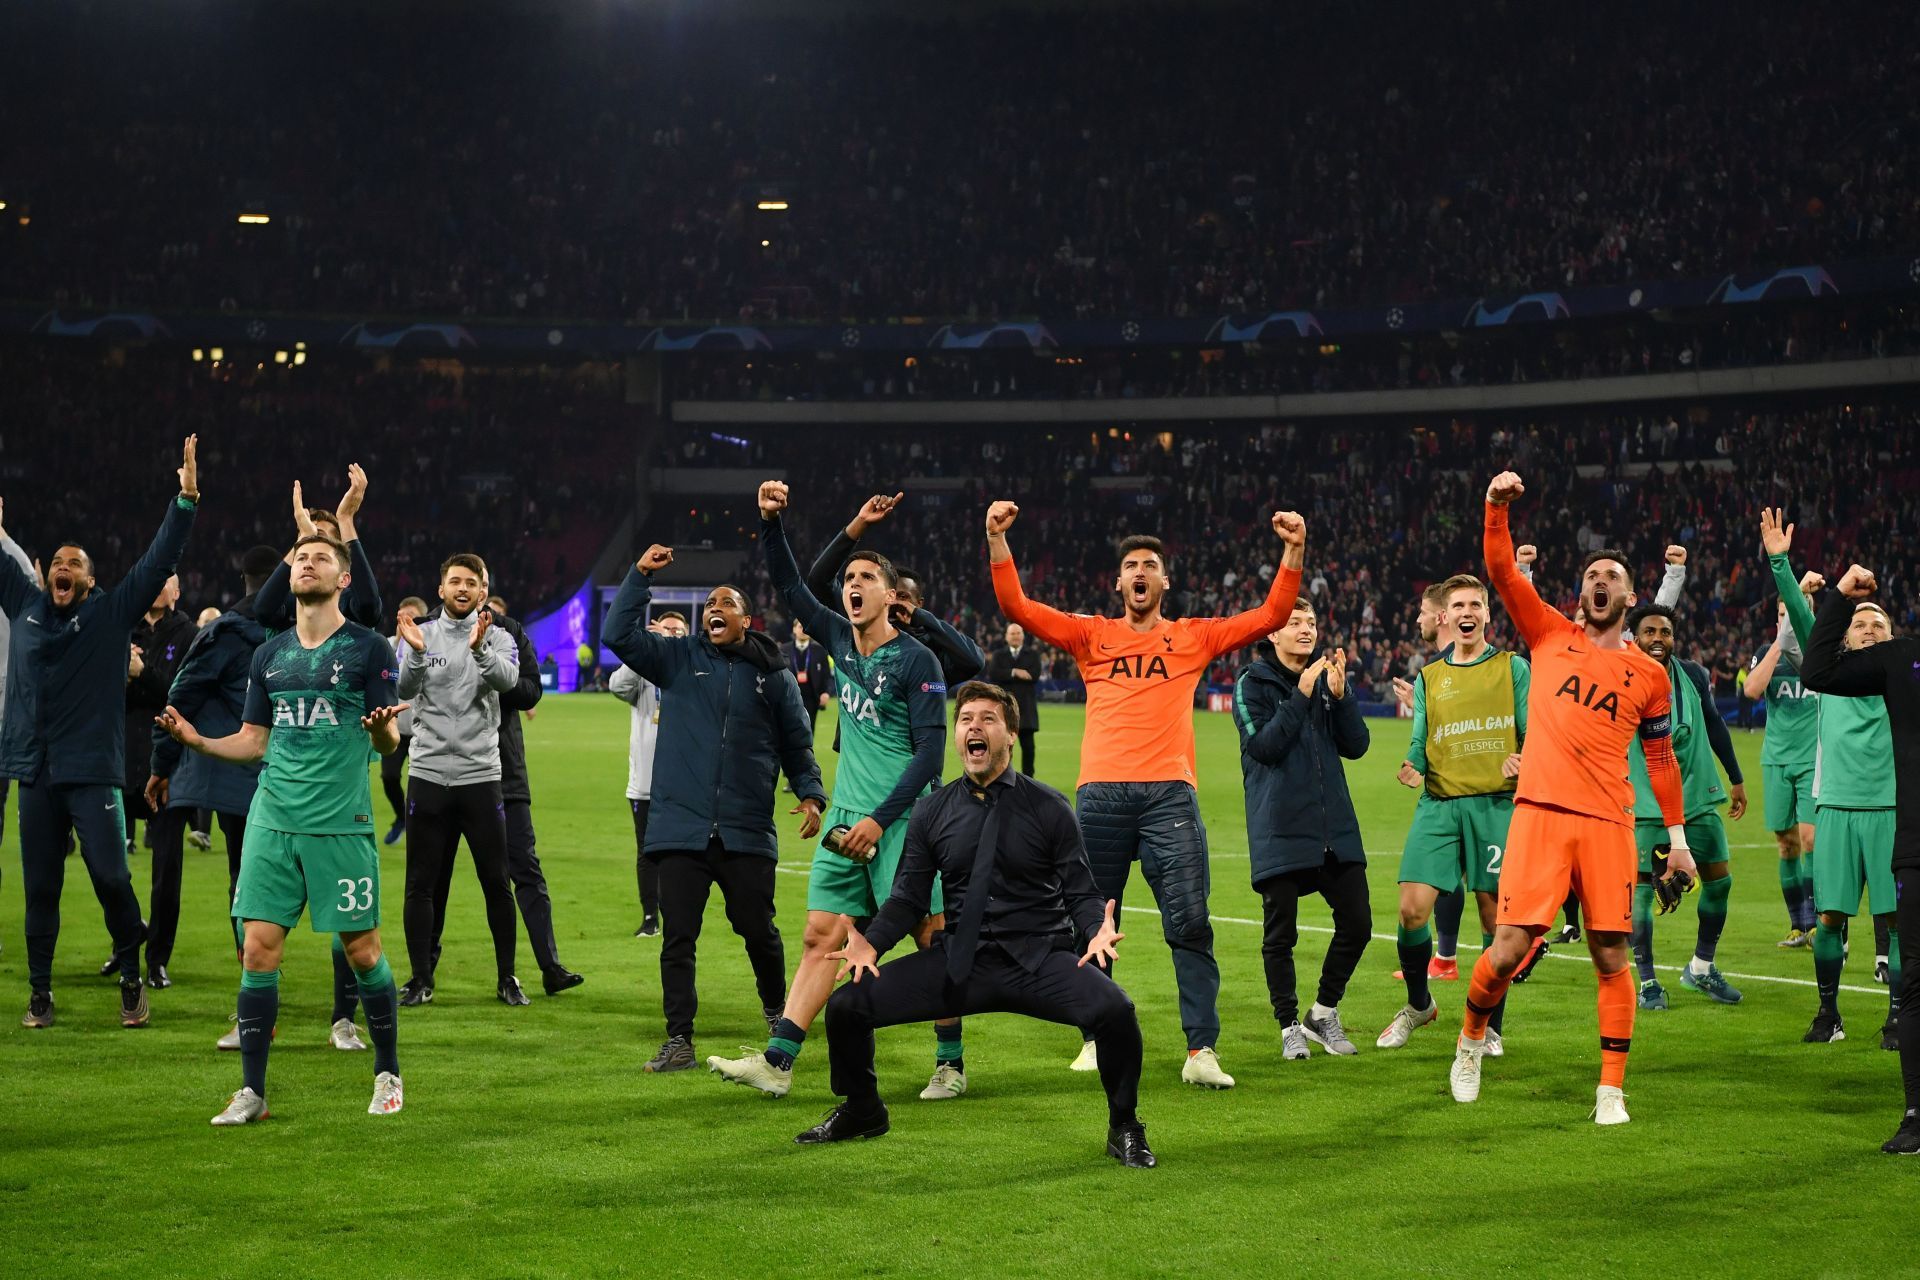 Pochettino led Spurs to the UEFA Champions League final in 2019